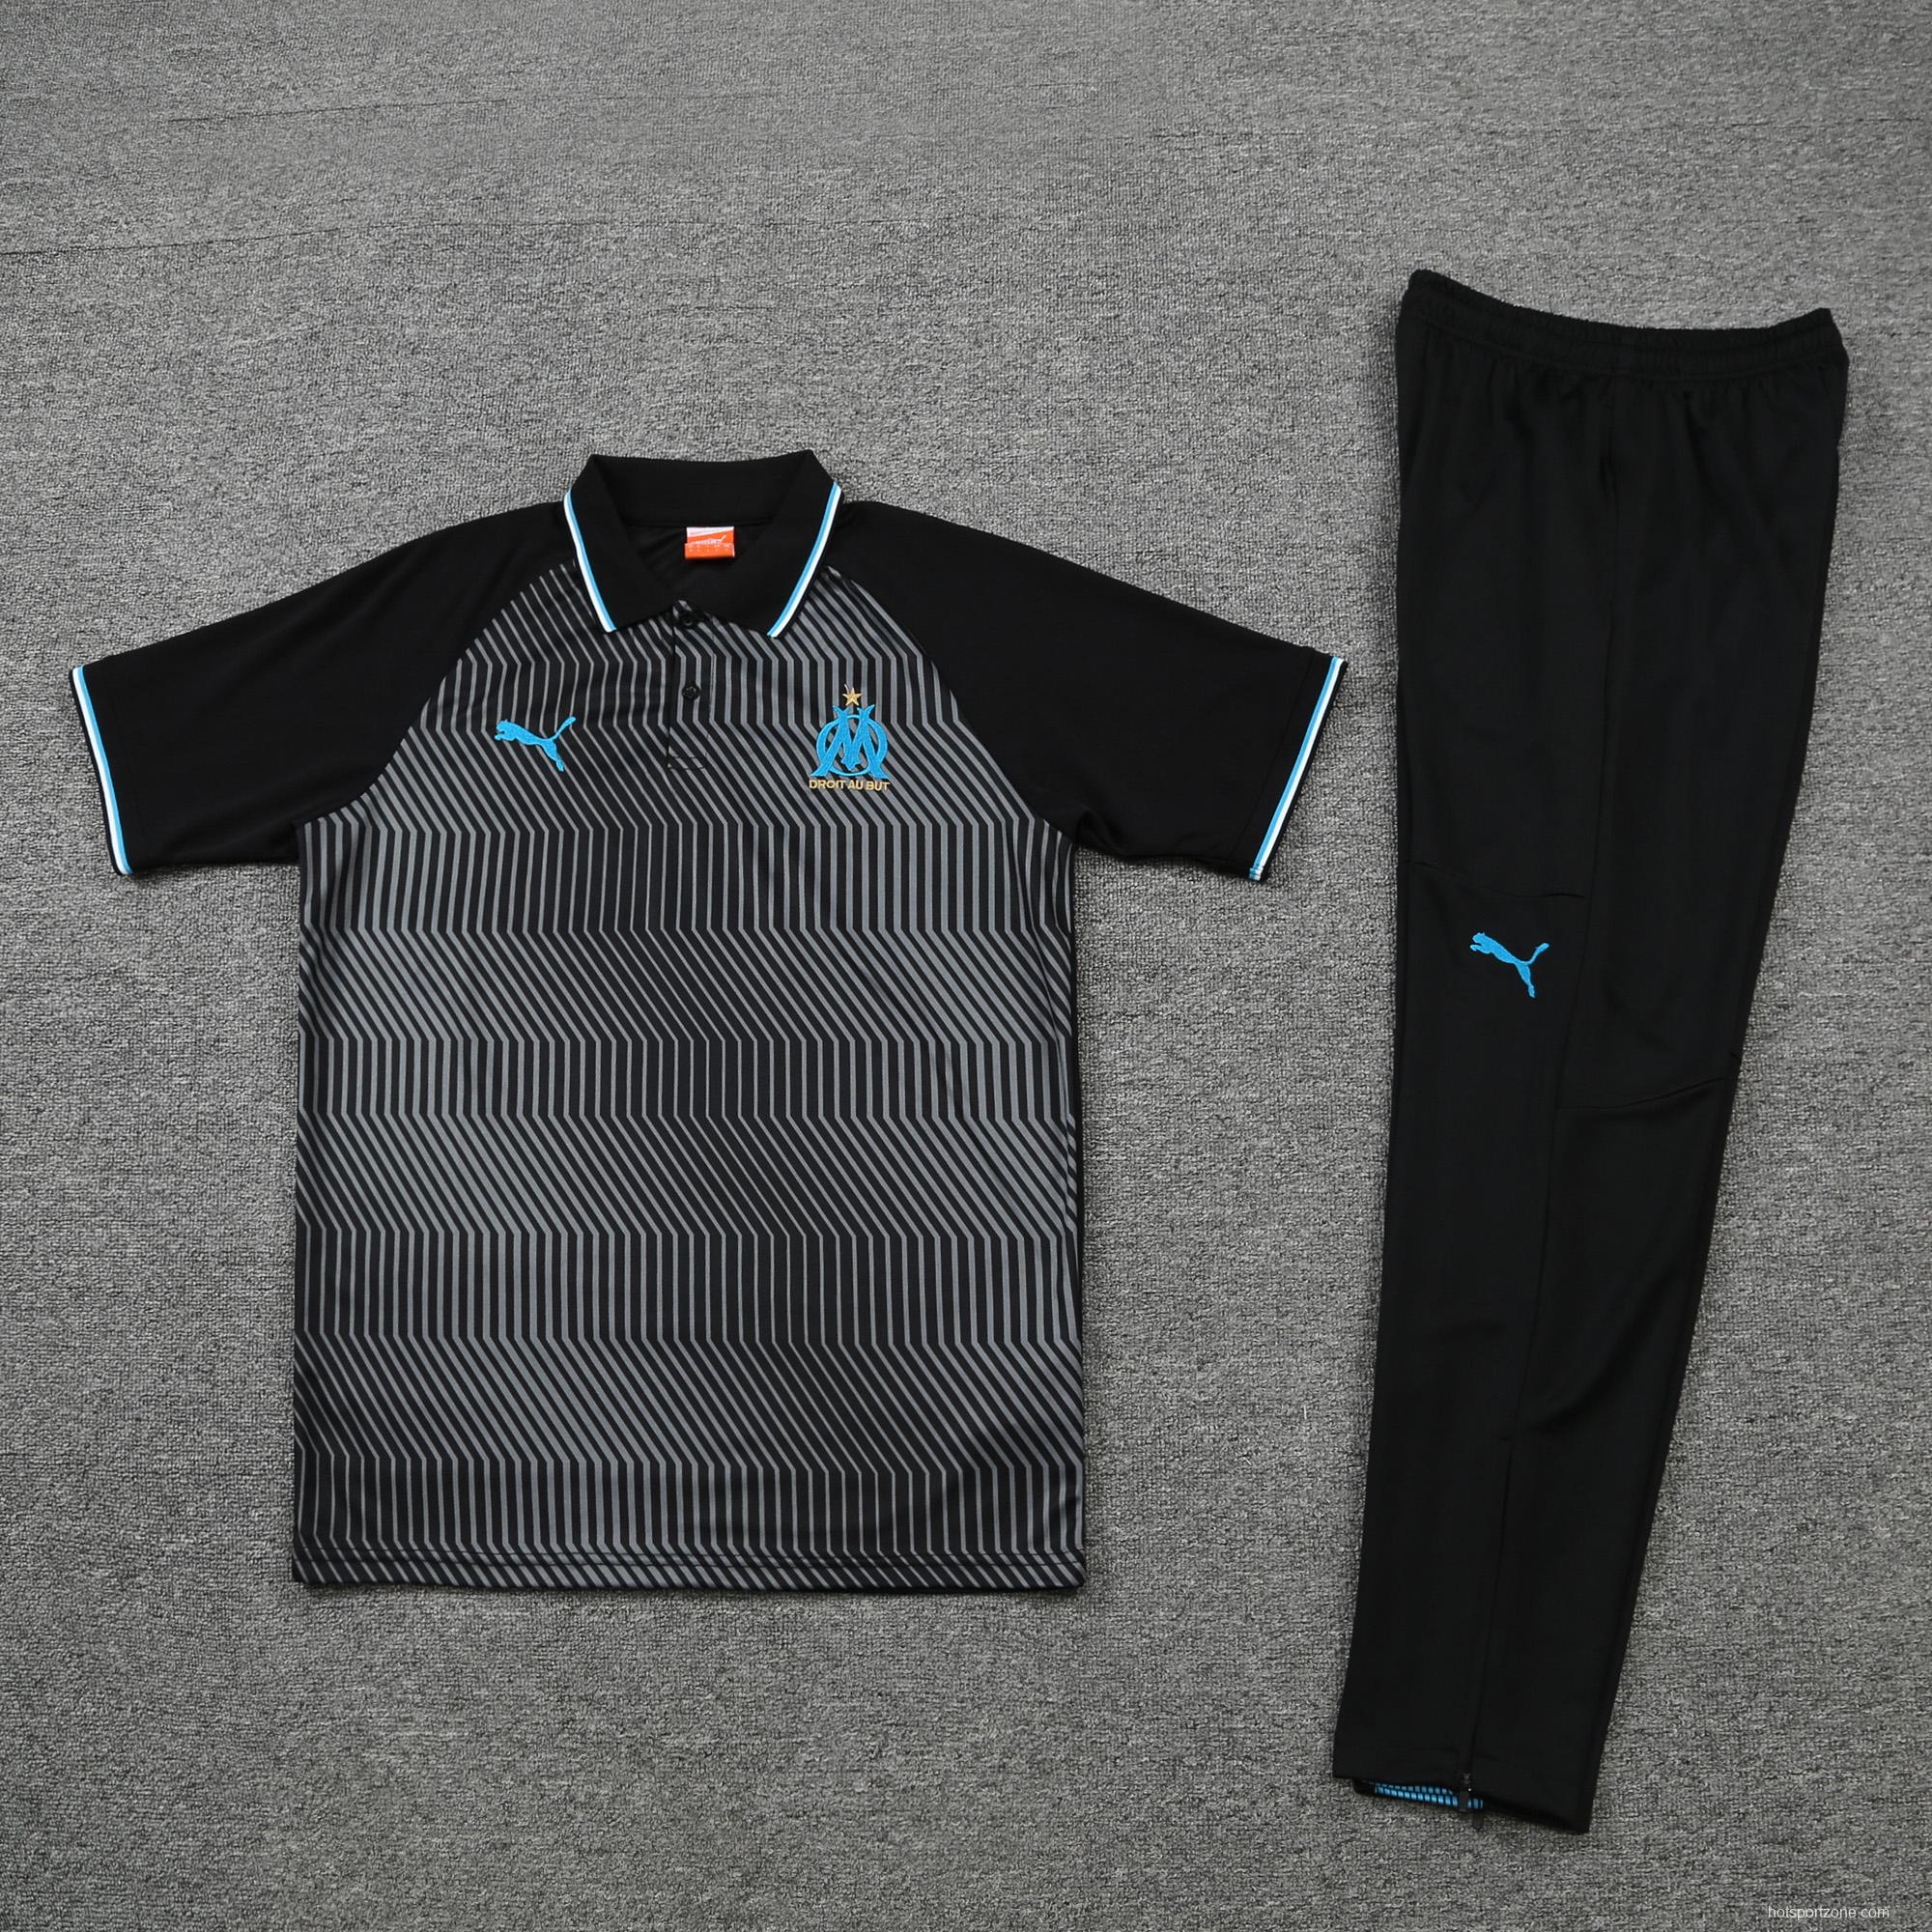 Olympique de Marseille POLO kit Grey (not supported to be sold separately)